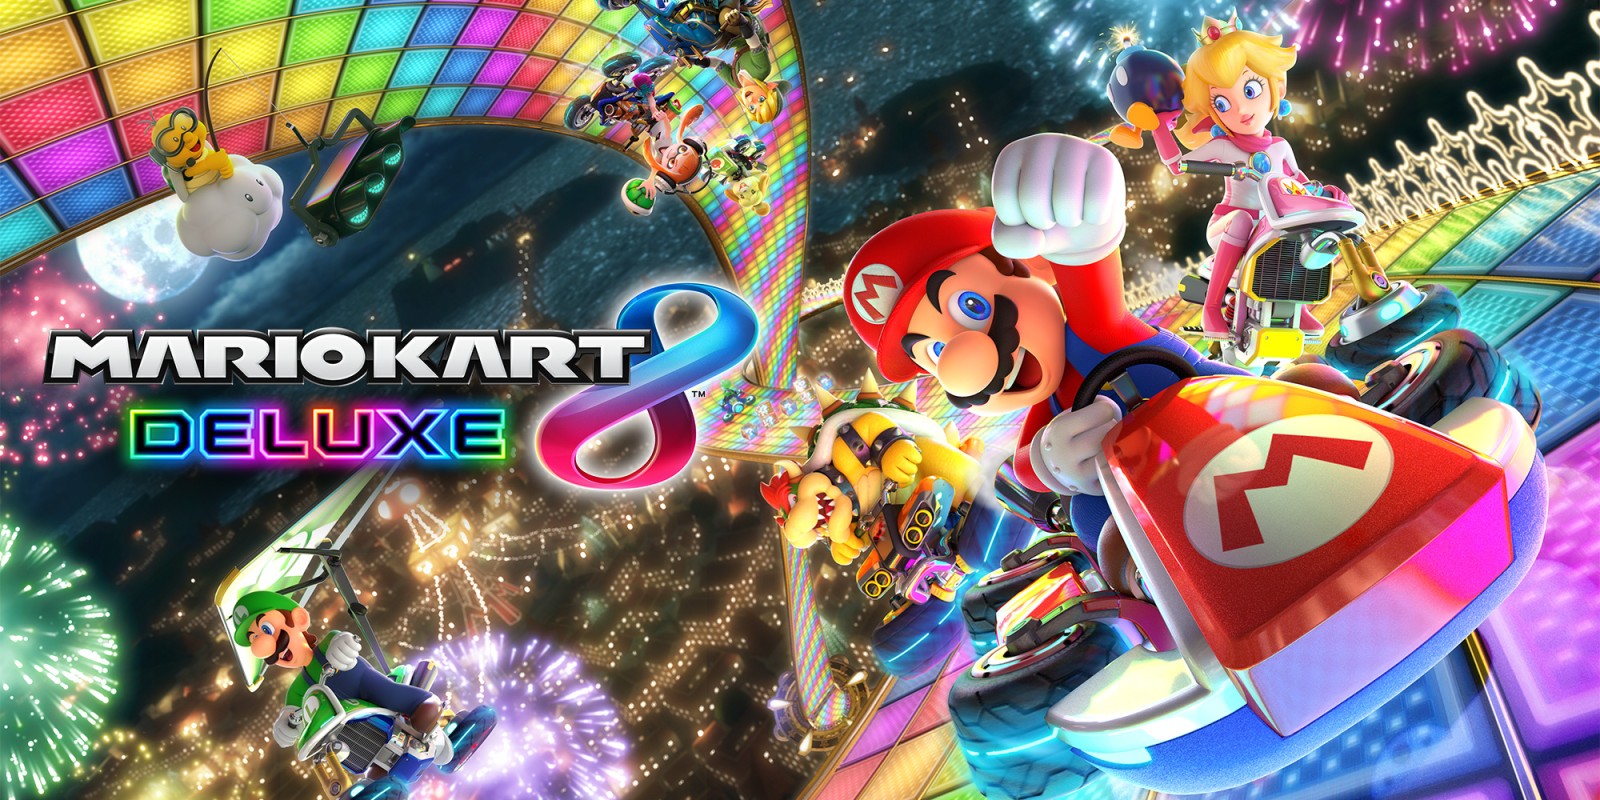 Mario Kart 8 Deluxe Update (v2.4.0) Brings Wave 5, New Characters, and Bug Fixes Nintendo Connect